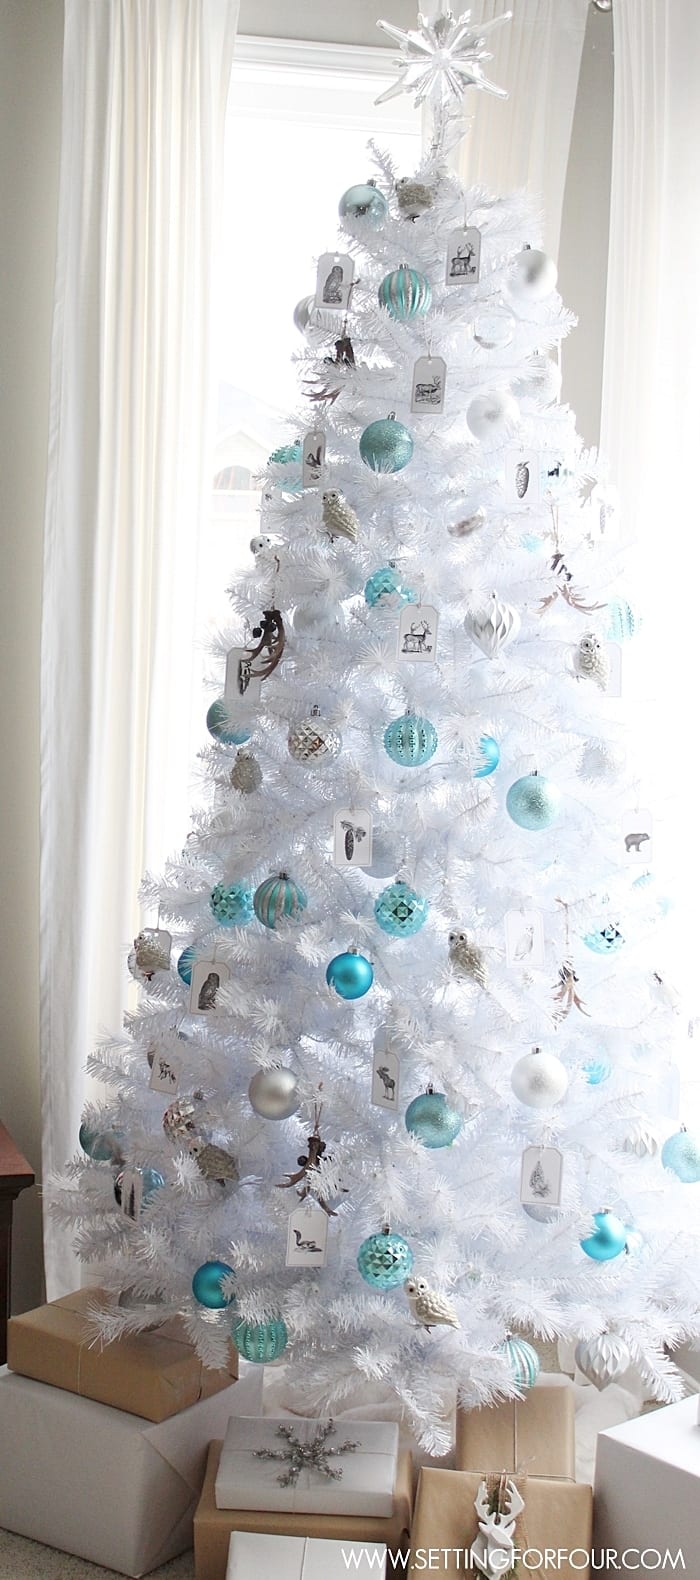 Invoice wallpaper Mince Christmas Tree Decoration Ideas That Aren't Boring - Simplemost